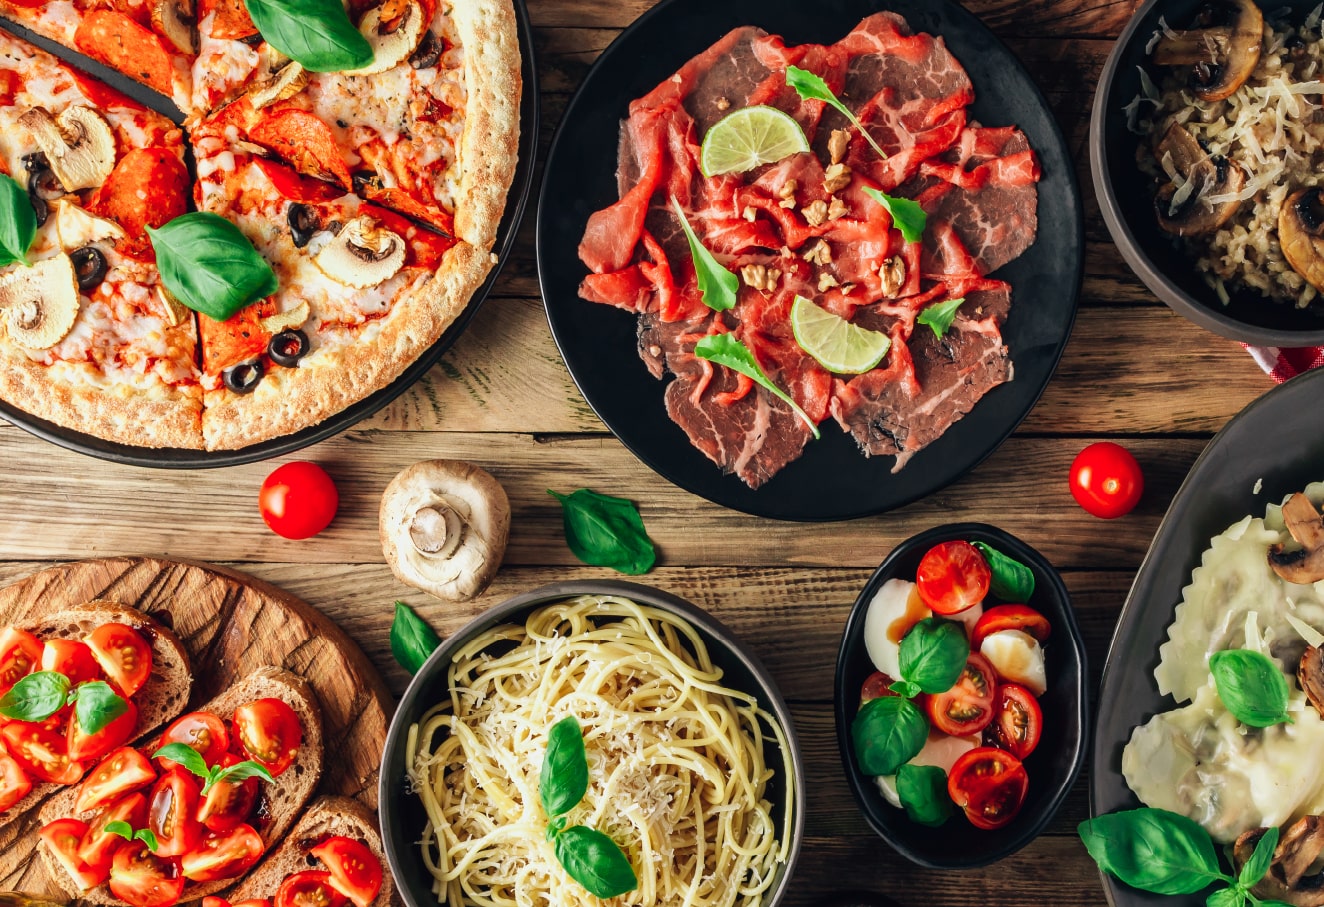 Six different Italian dishes are on a wooden table. There is pepperoni pizza, cured meat, mushroom risotto, ravioli, spaghetti and a few slices of sourdough bread with tomatoes on top.